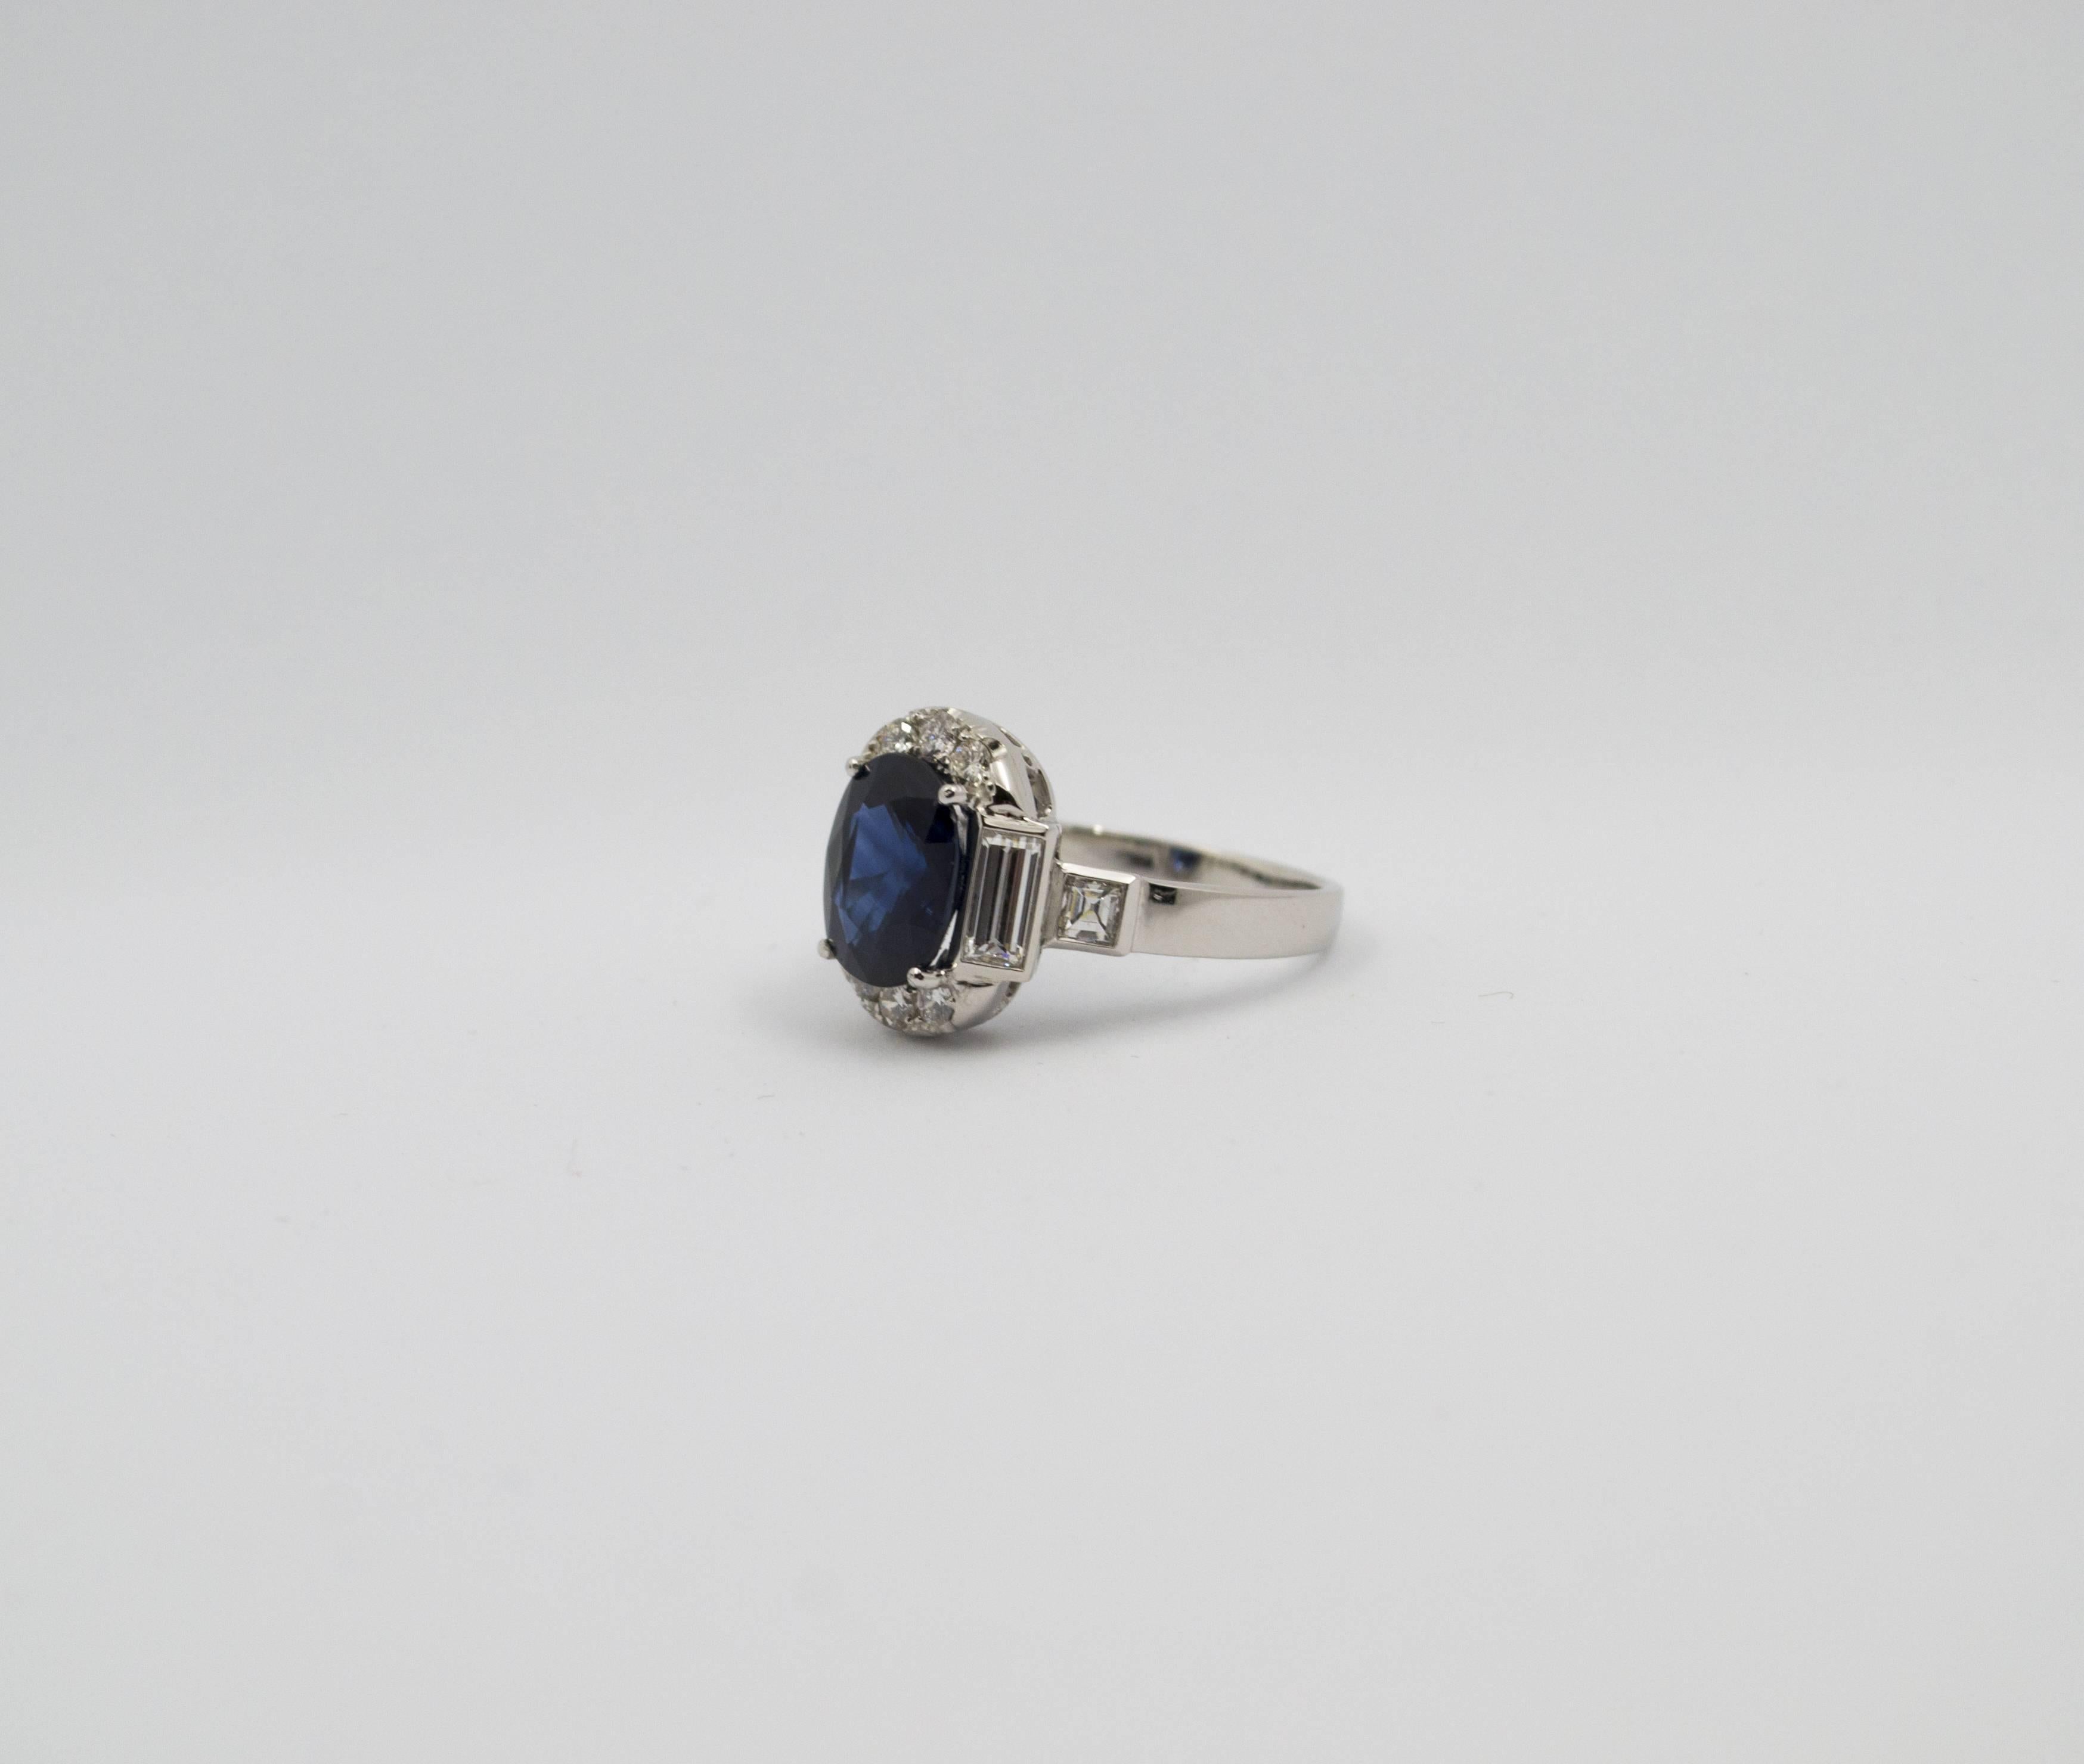 This Ring is made of 18K White Gold.
This Ring has 1.14 Carats of White Diamonds.
This Ring has a GemTech Certified 3.36 Carats Blue Sapphire.
Size ITA: 16 USA: 7.5
We're a workshop so every piece is handmade, customizable and resizable.